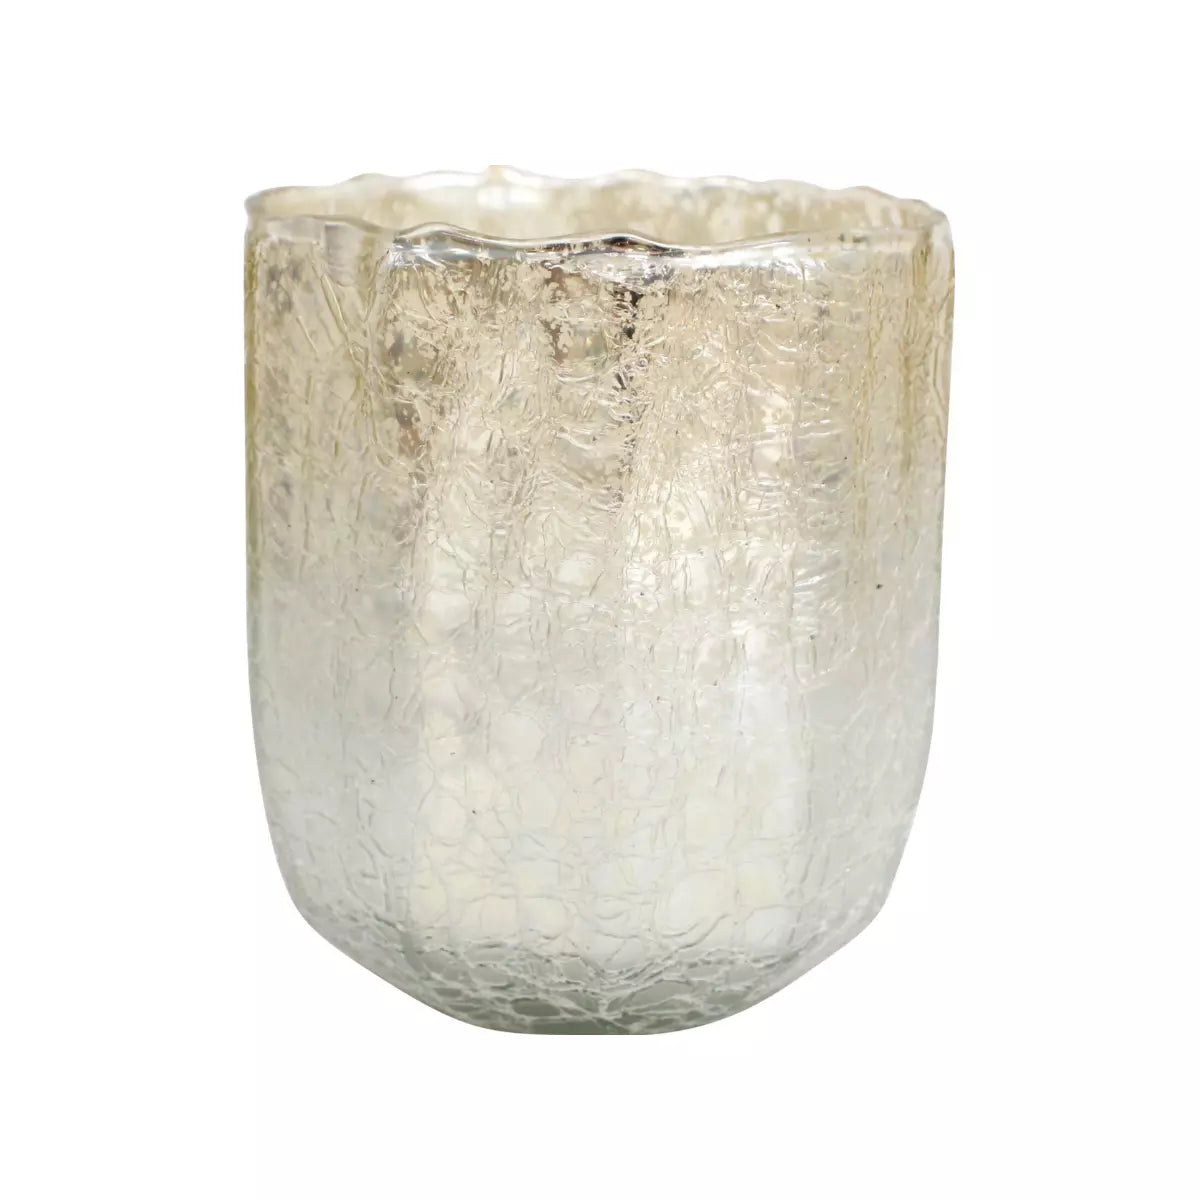 A shimmering LaVida votive candle holder with a textured gold background.
Product Name: Candle Holder - Crackle Frost
Brand Name: LaVida